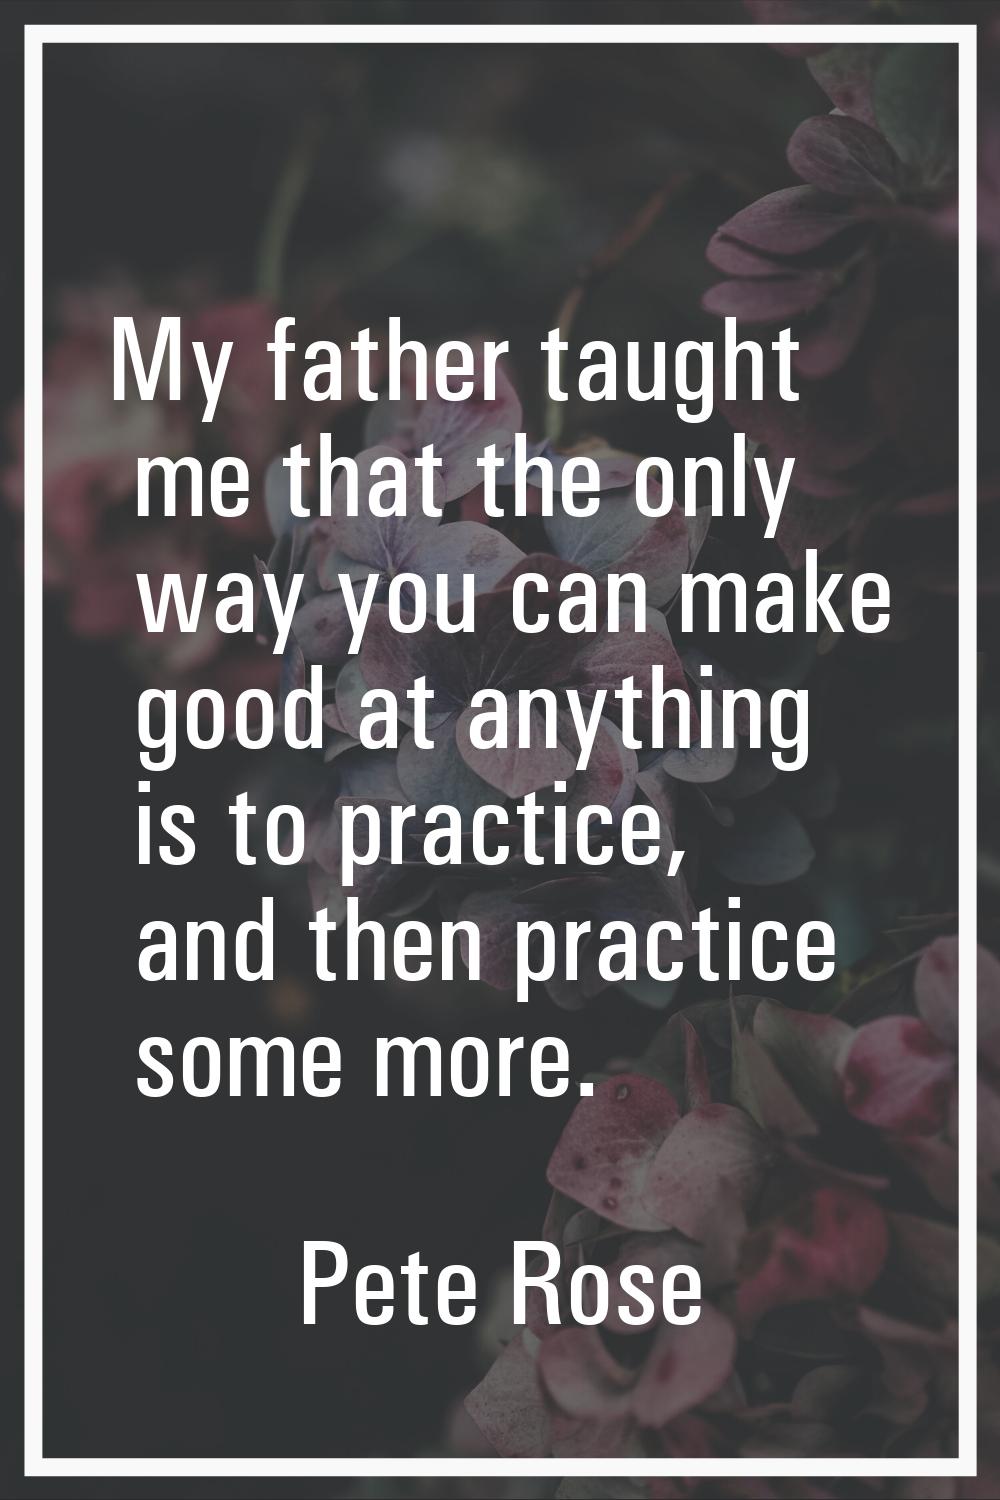 My father taught me that the only way you can make good at anything is to practice, and then practi